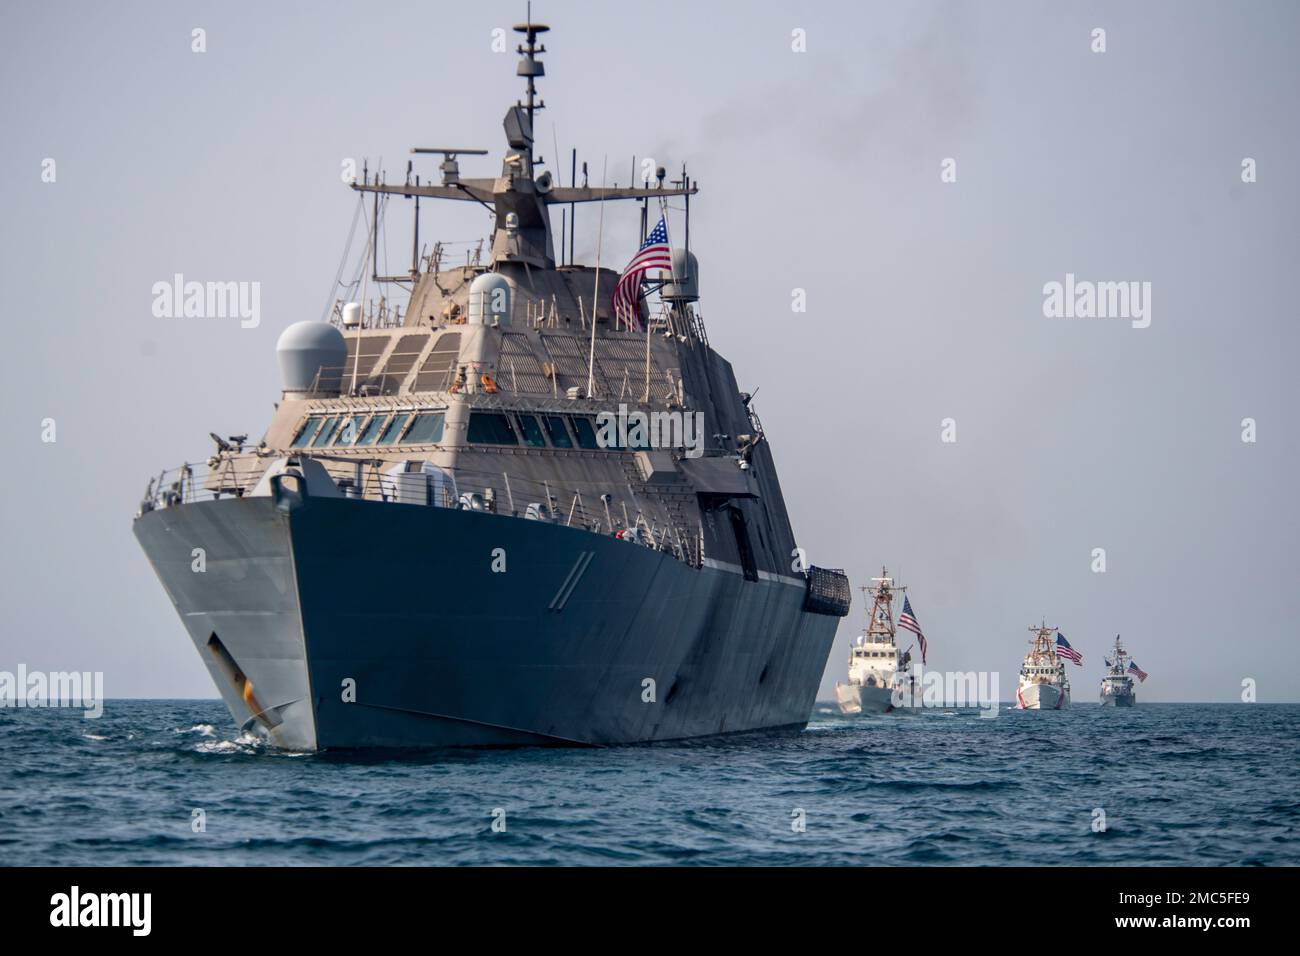 220626-N-NS602-1402 ARABIAN GULF (June 26, 2022) Littoral combat ship USS Sioux City (LCS 11), U.S. Coast guard cutters USCGC Baranof (WPB 1318) and USCGC Robert Goldman (WPC 1142) and coastal patrol ship USS Thunderbolt (PC 12) sail in the Arabian Gulf, June 26. U.S. naval forces regularly operate across the Middle East region to help ensure security and stability. Stock Photo